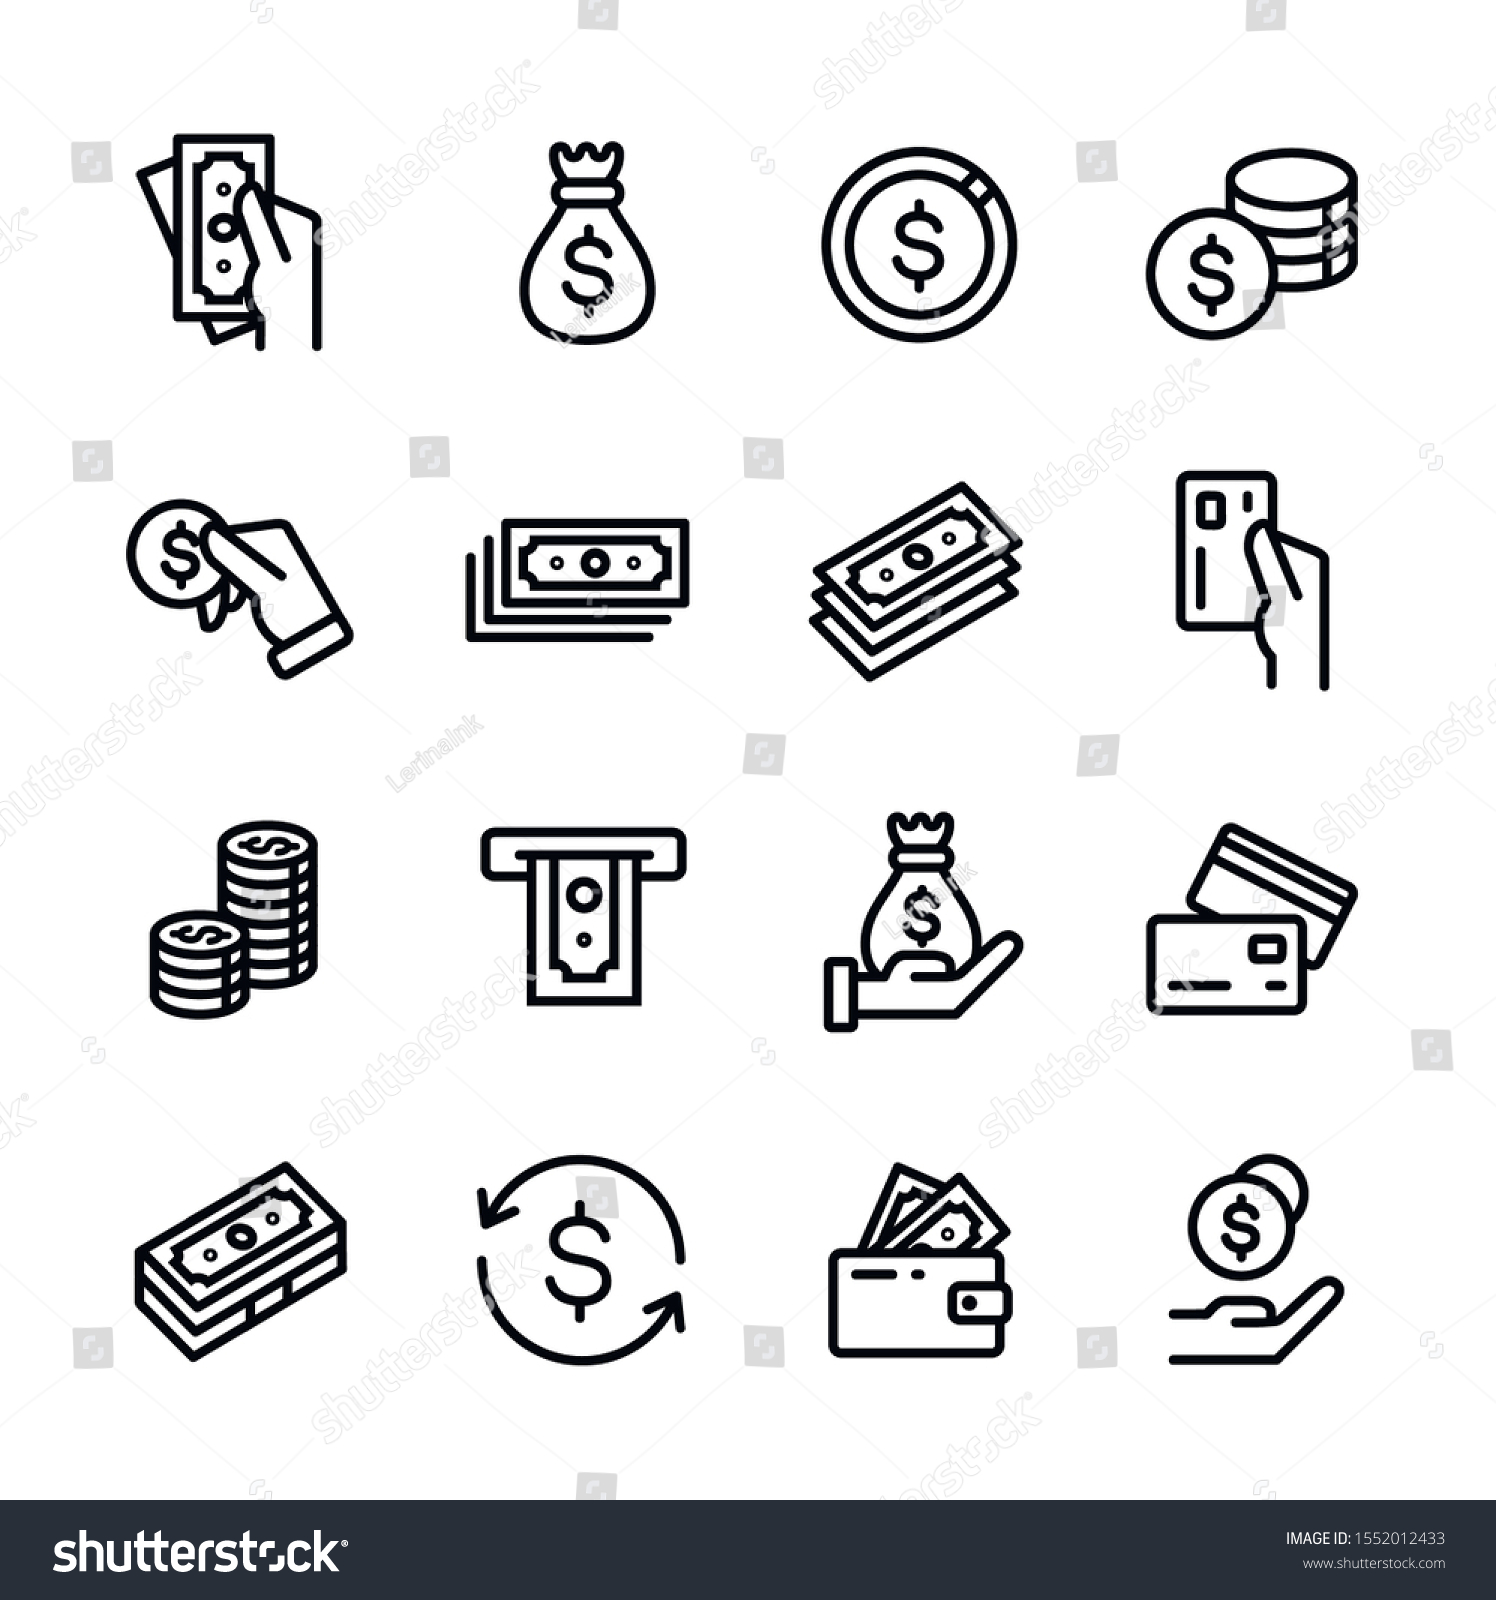 Money, finance, banking outline icons collection. Money line icons set vector illustration. Money bag, coins, credit card, wallet and more #1552012433